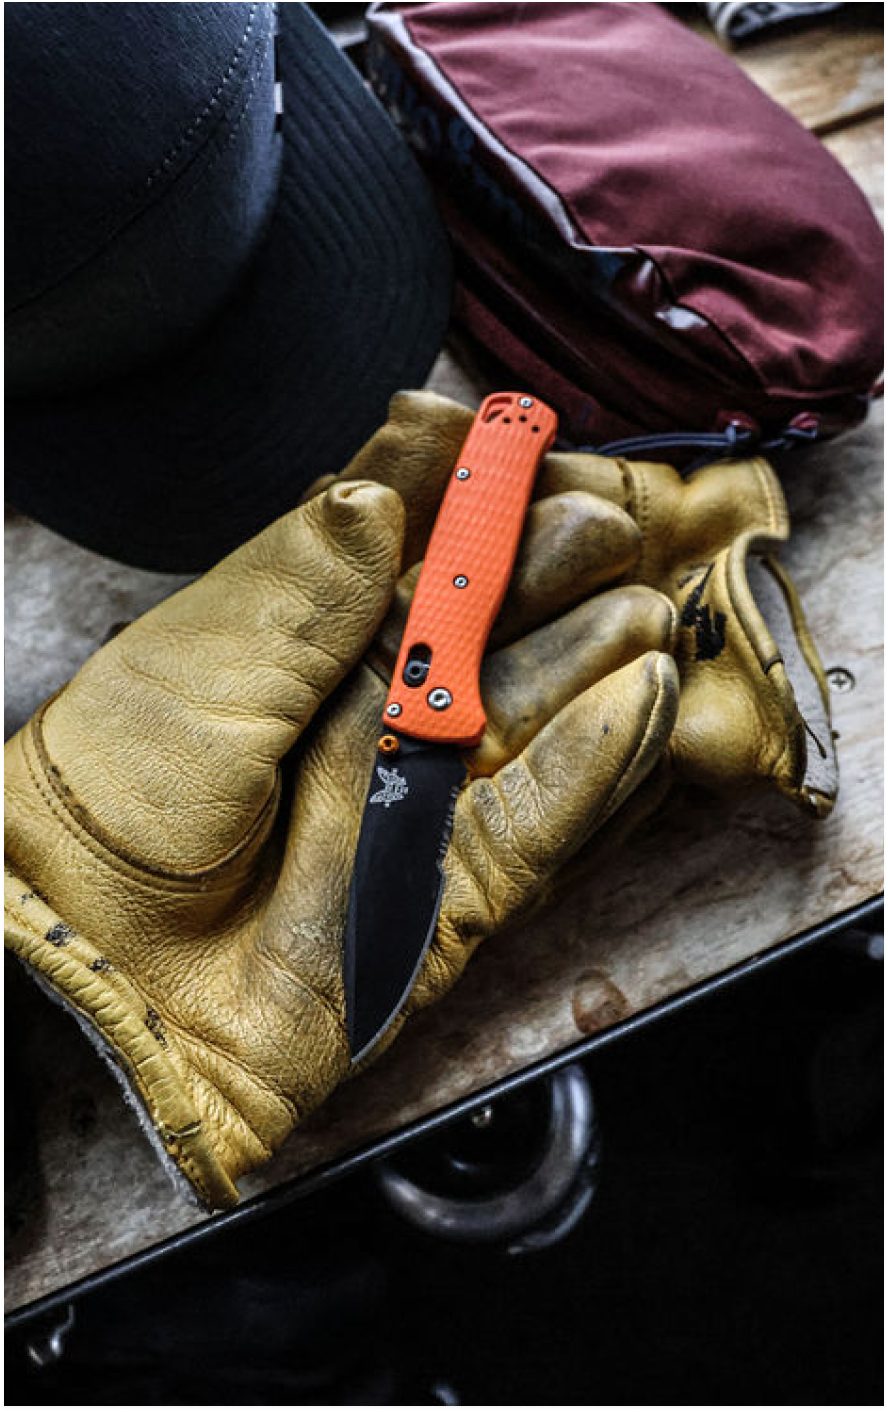 Explore Benchmade Knives for Every Adventure